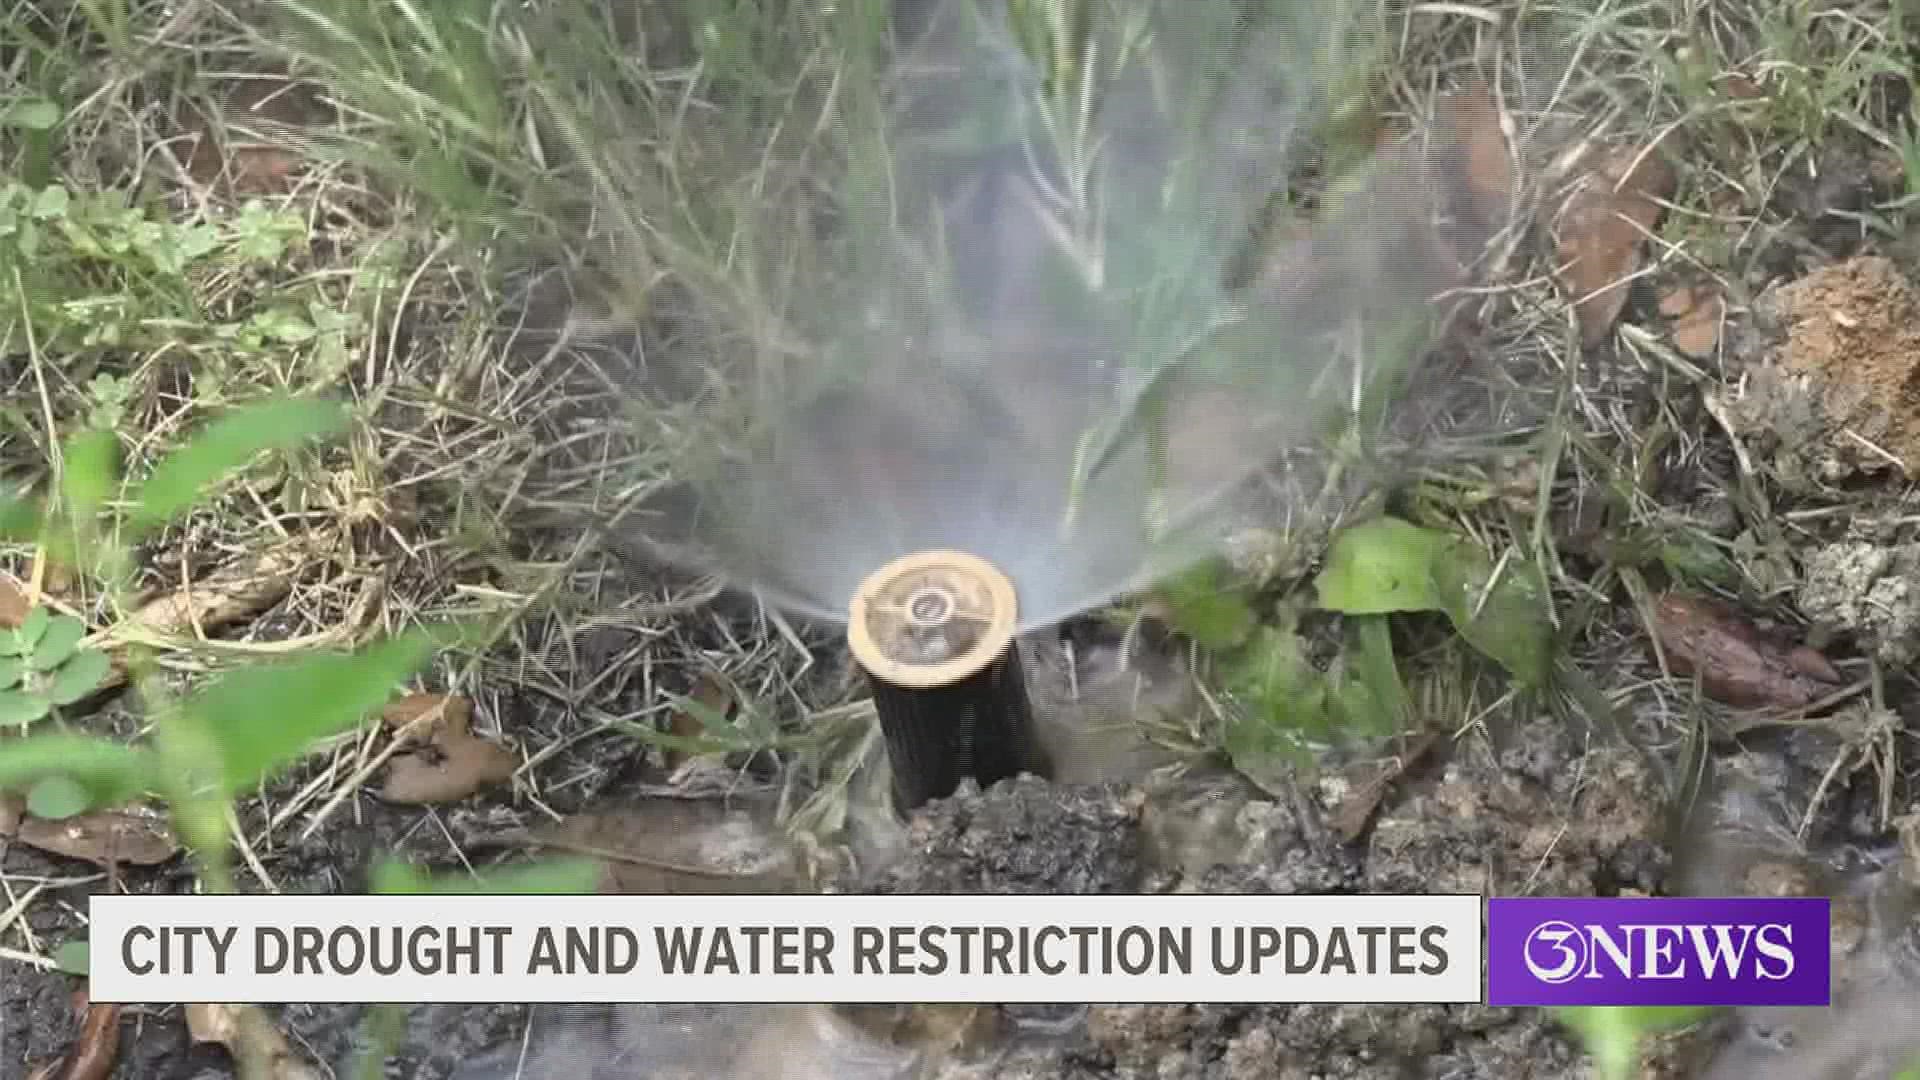 City officials said that water restrictions could linger for some time to come.